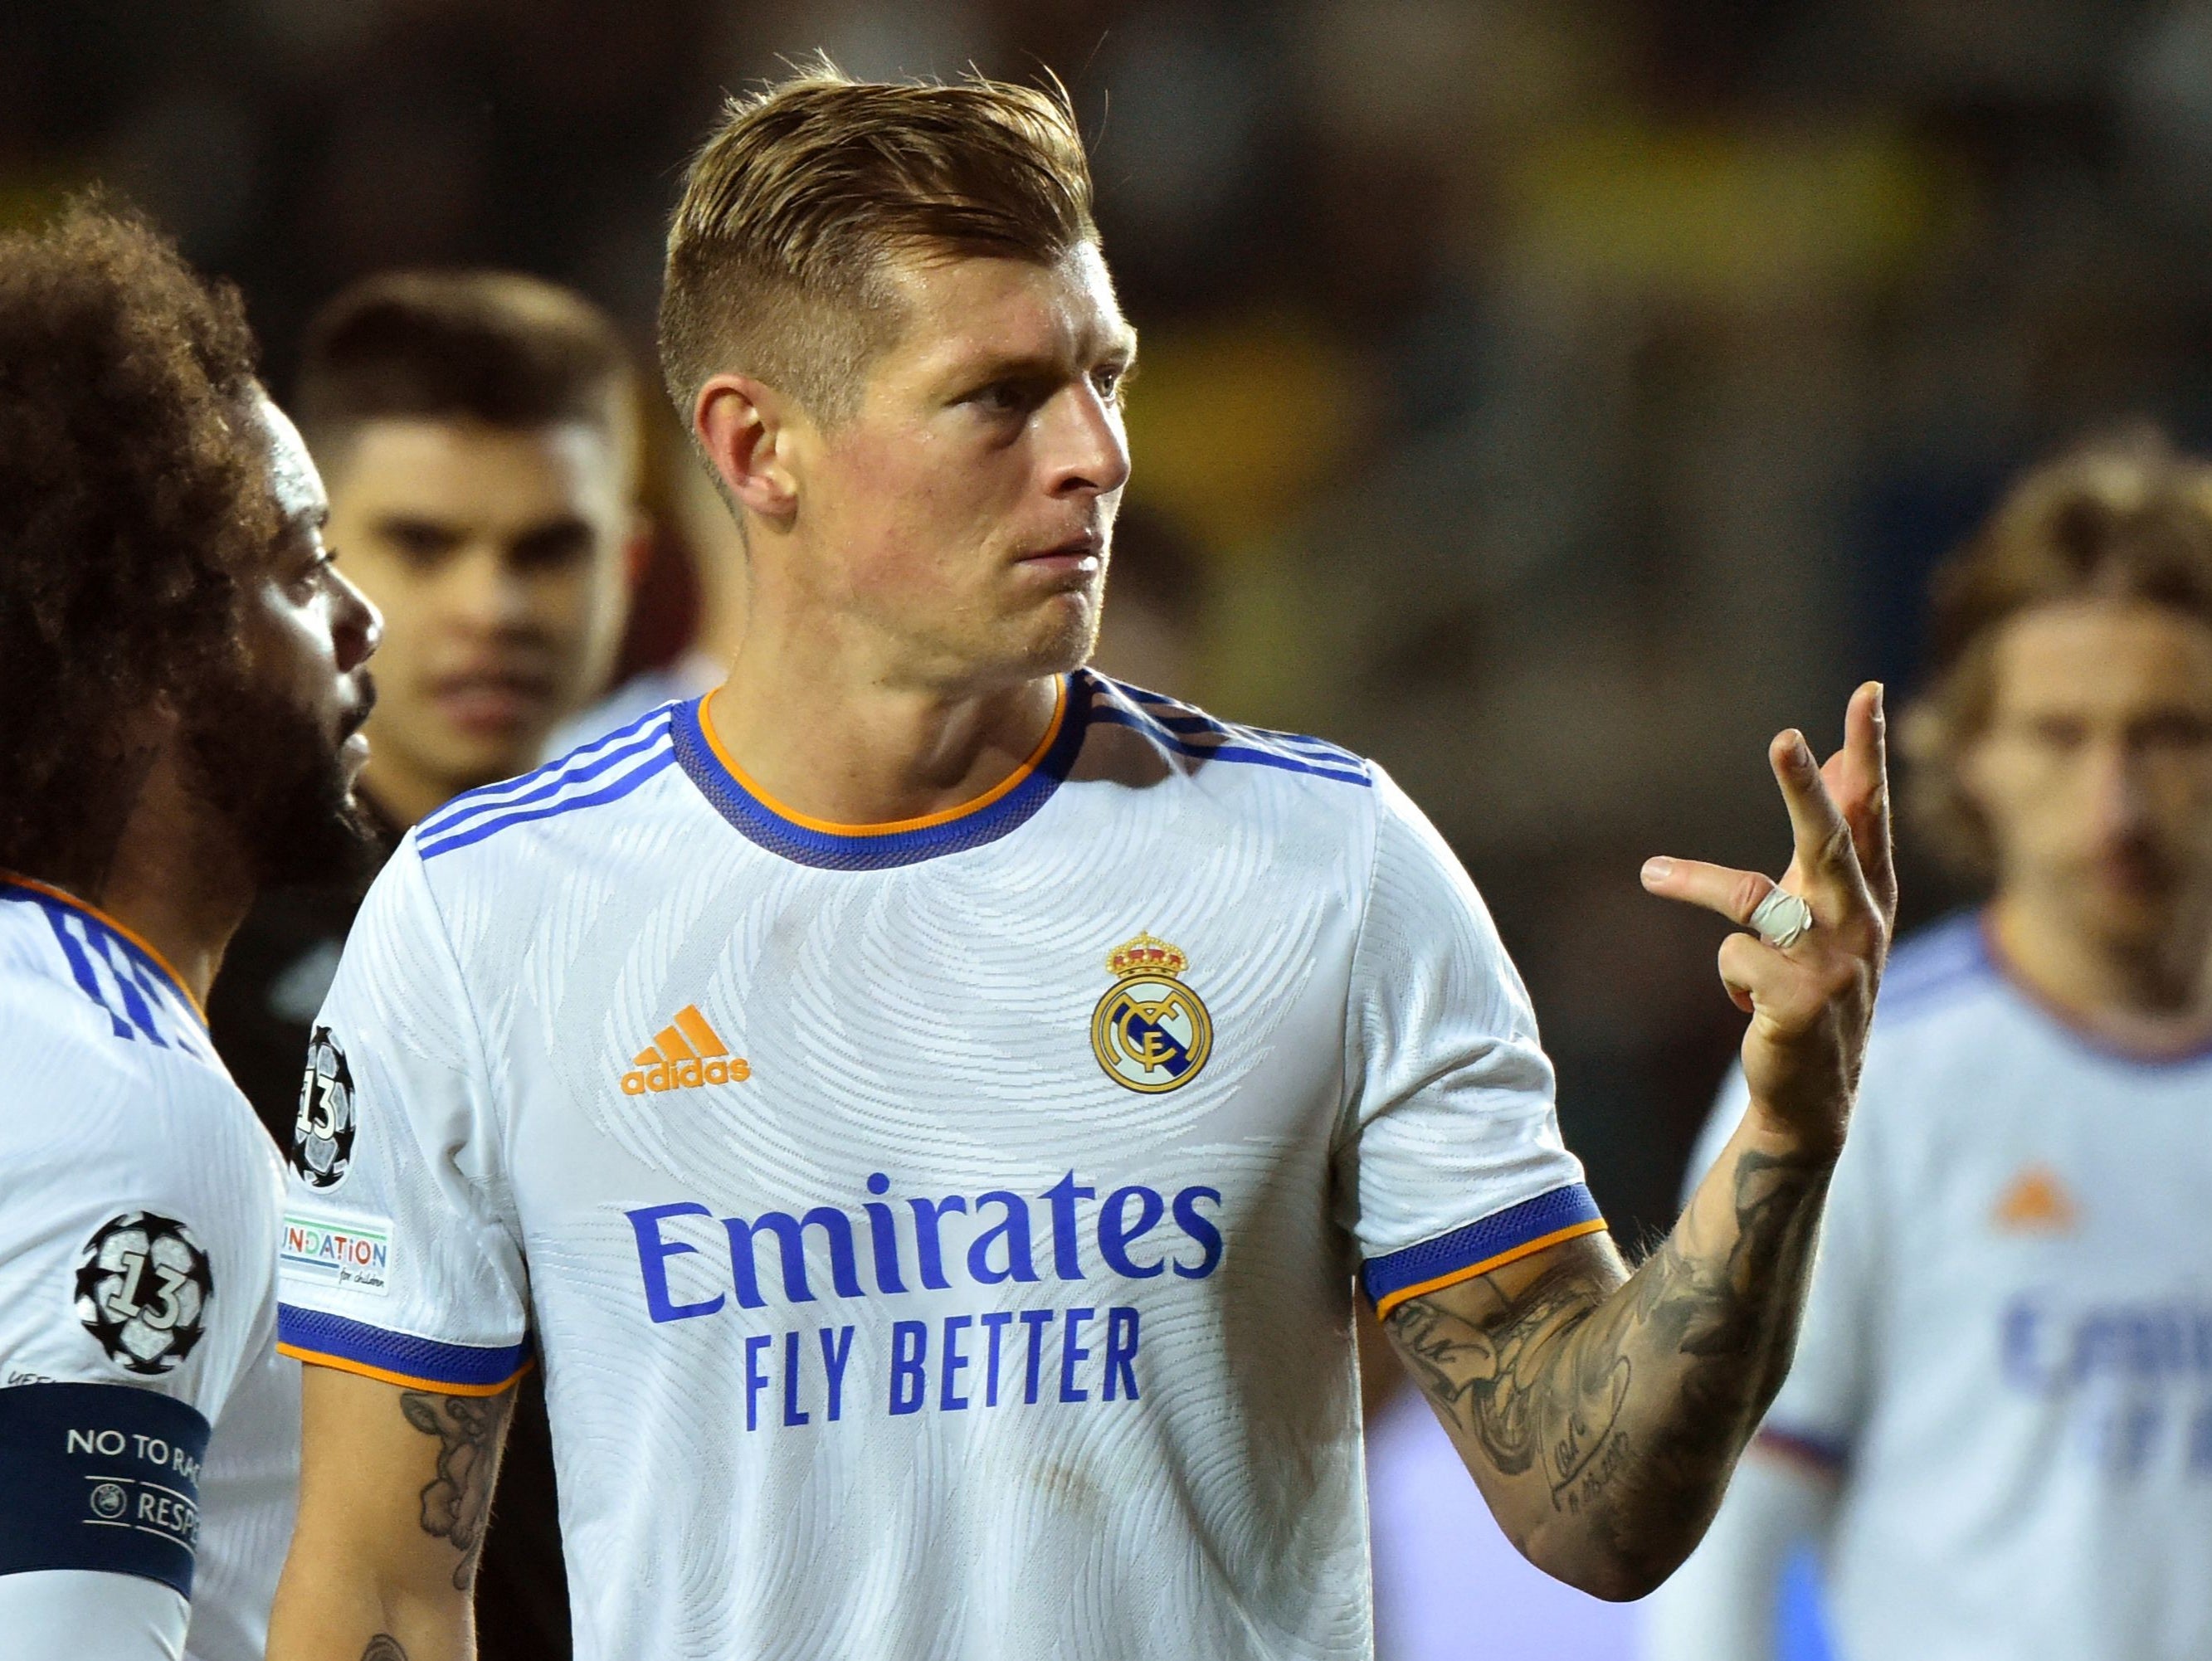 Real Madrid midfielder Toni Kroos was confused by the call